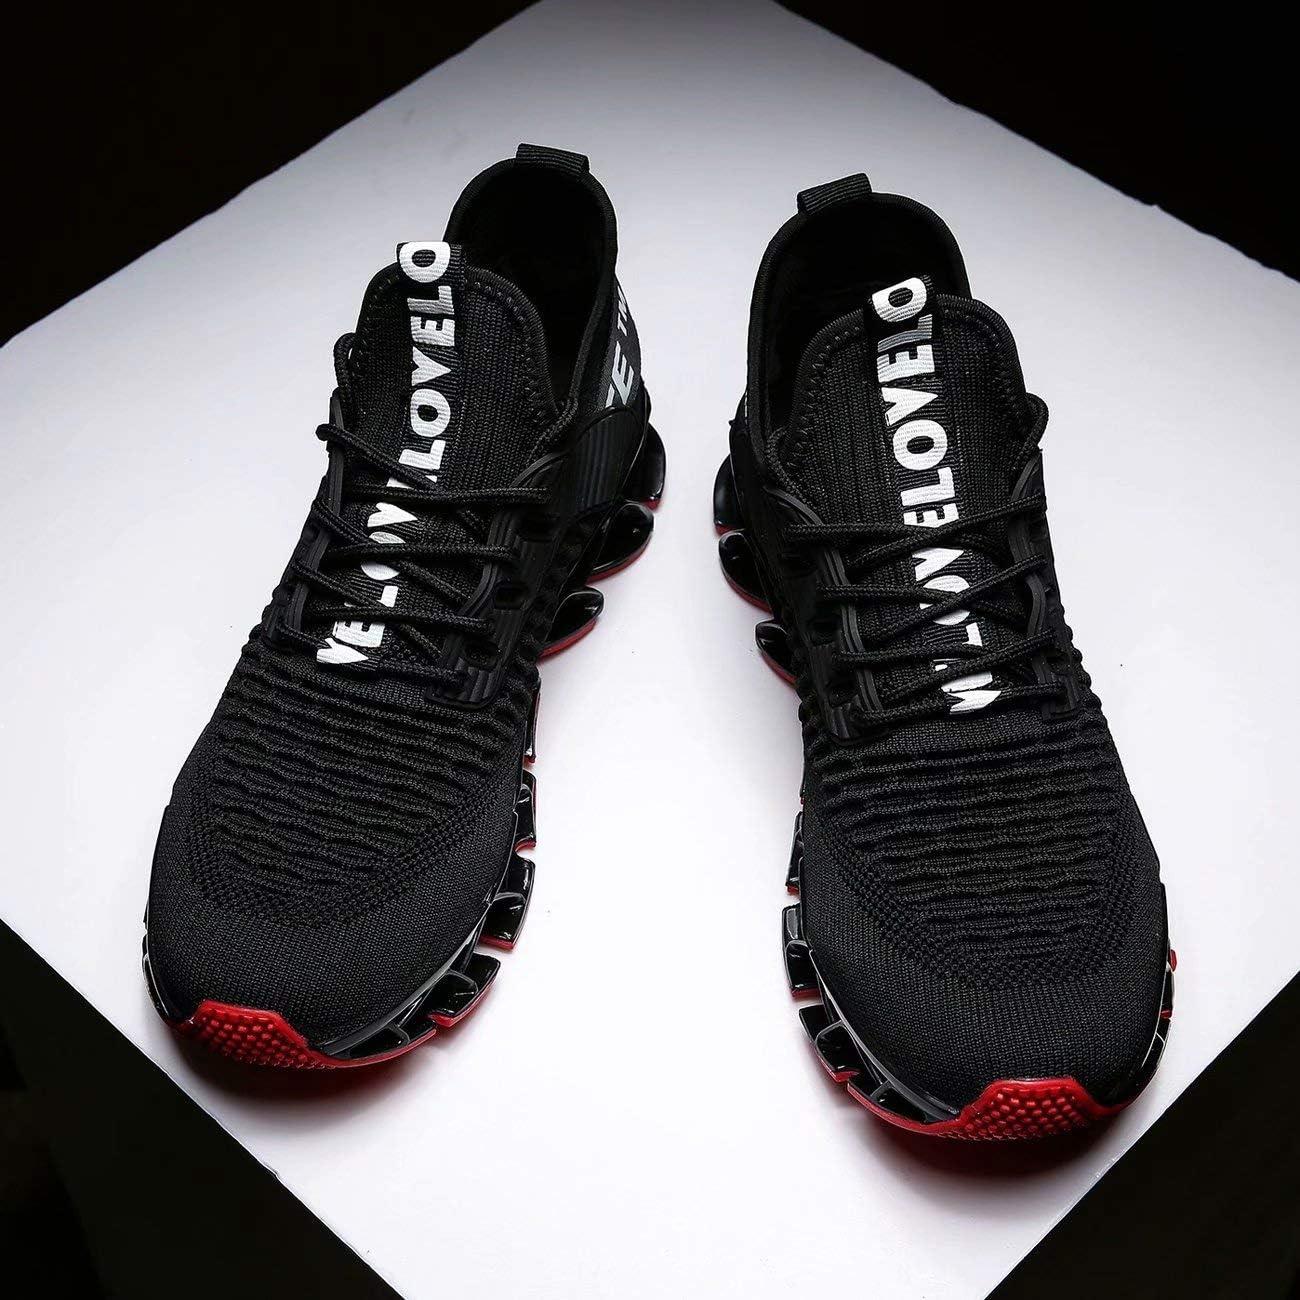 Buy Vooncosir Men's Fashion Sneakers Breathable Mesh Running Shoes Blade  Non Slip Soft Sole Casual Athletic Lightweight Walking Shoes(7,Full Black)  at